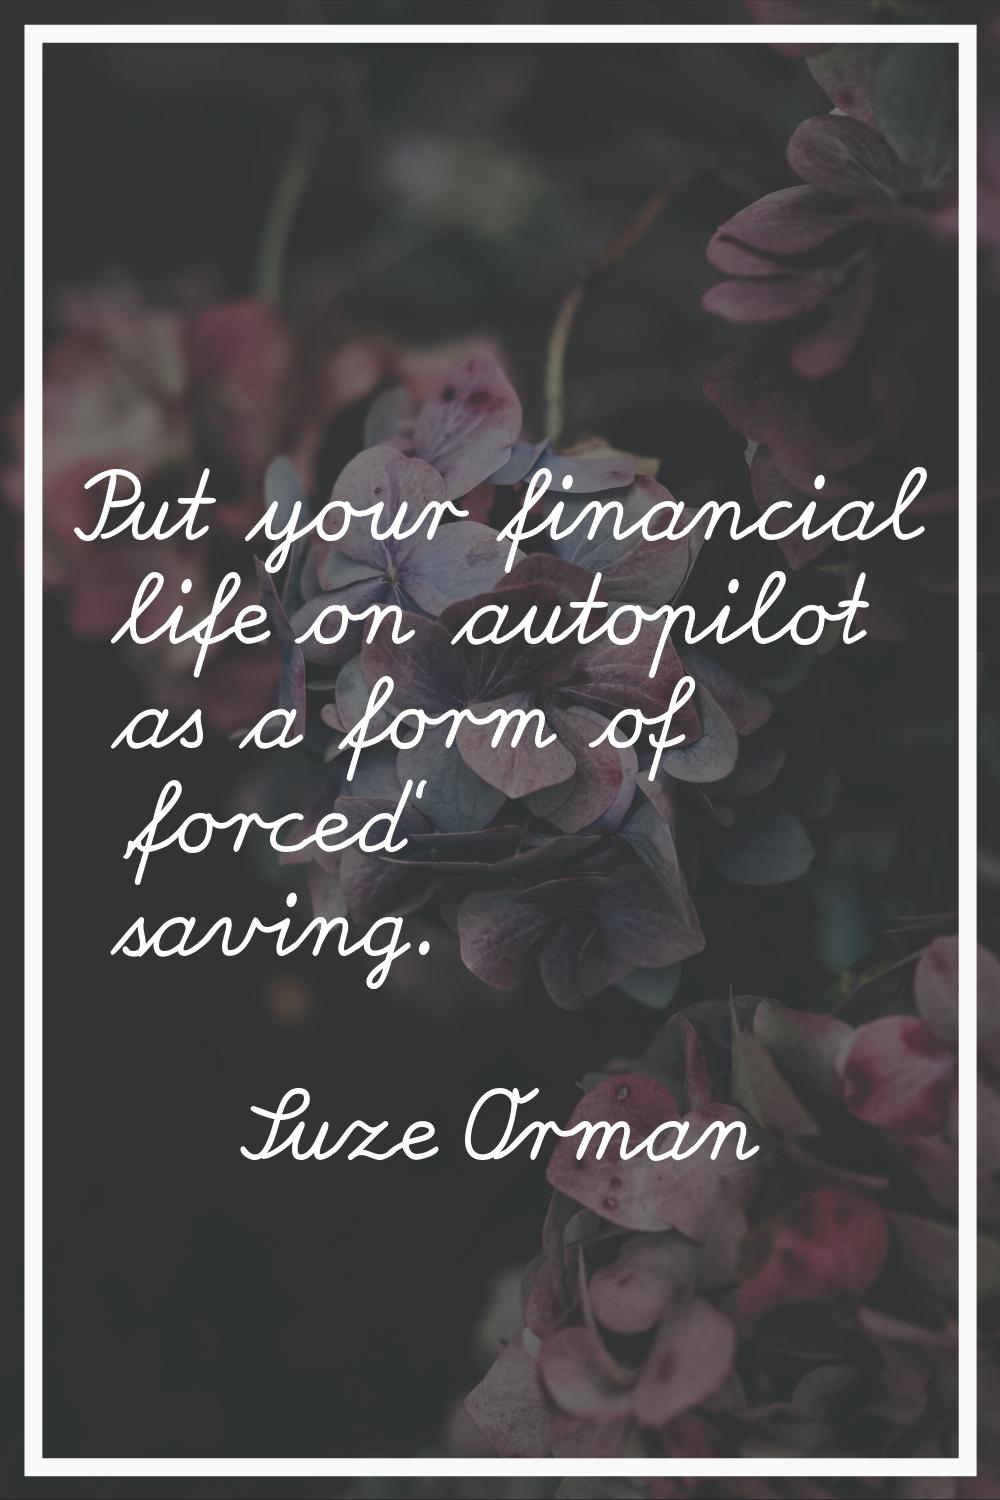 Put your financial life on autopilot as a form of 'forced' saving.